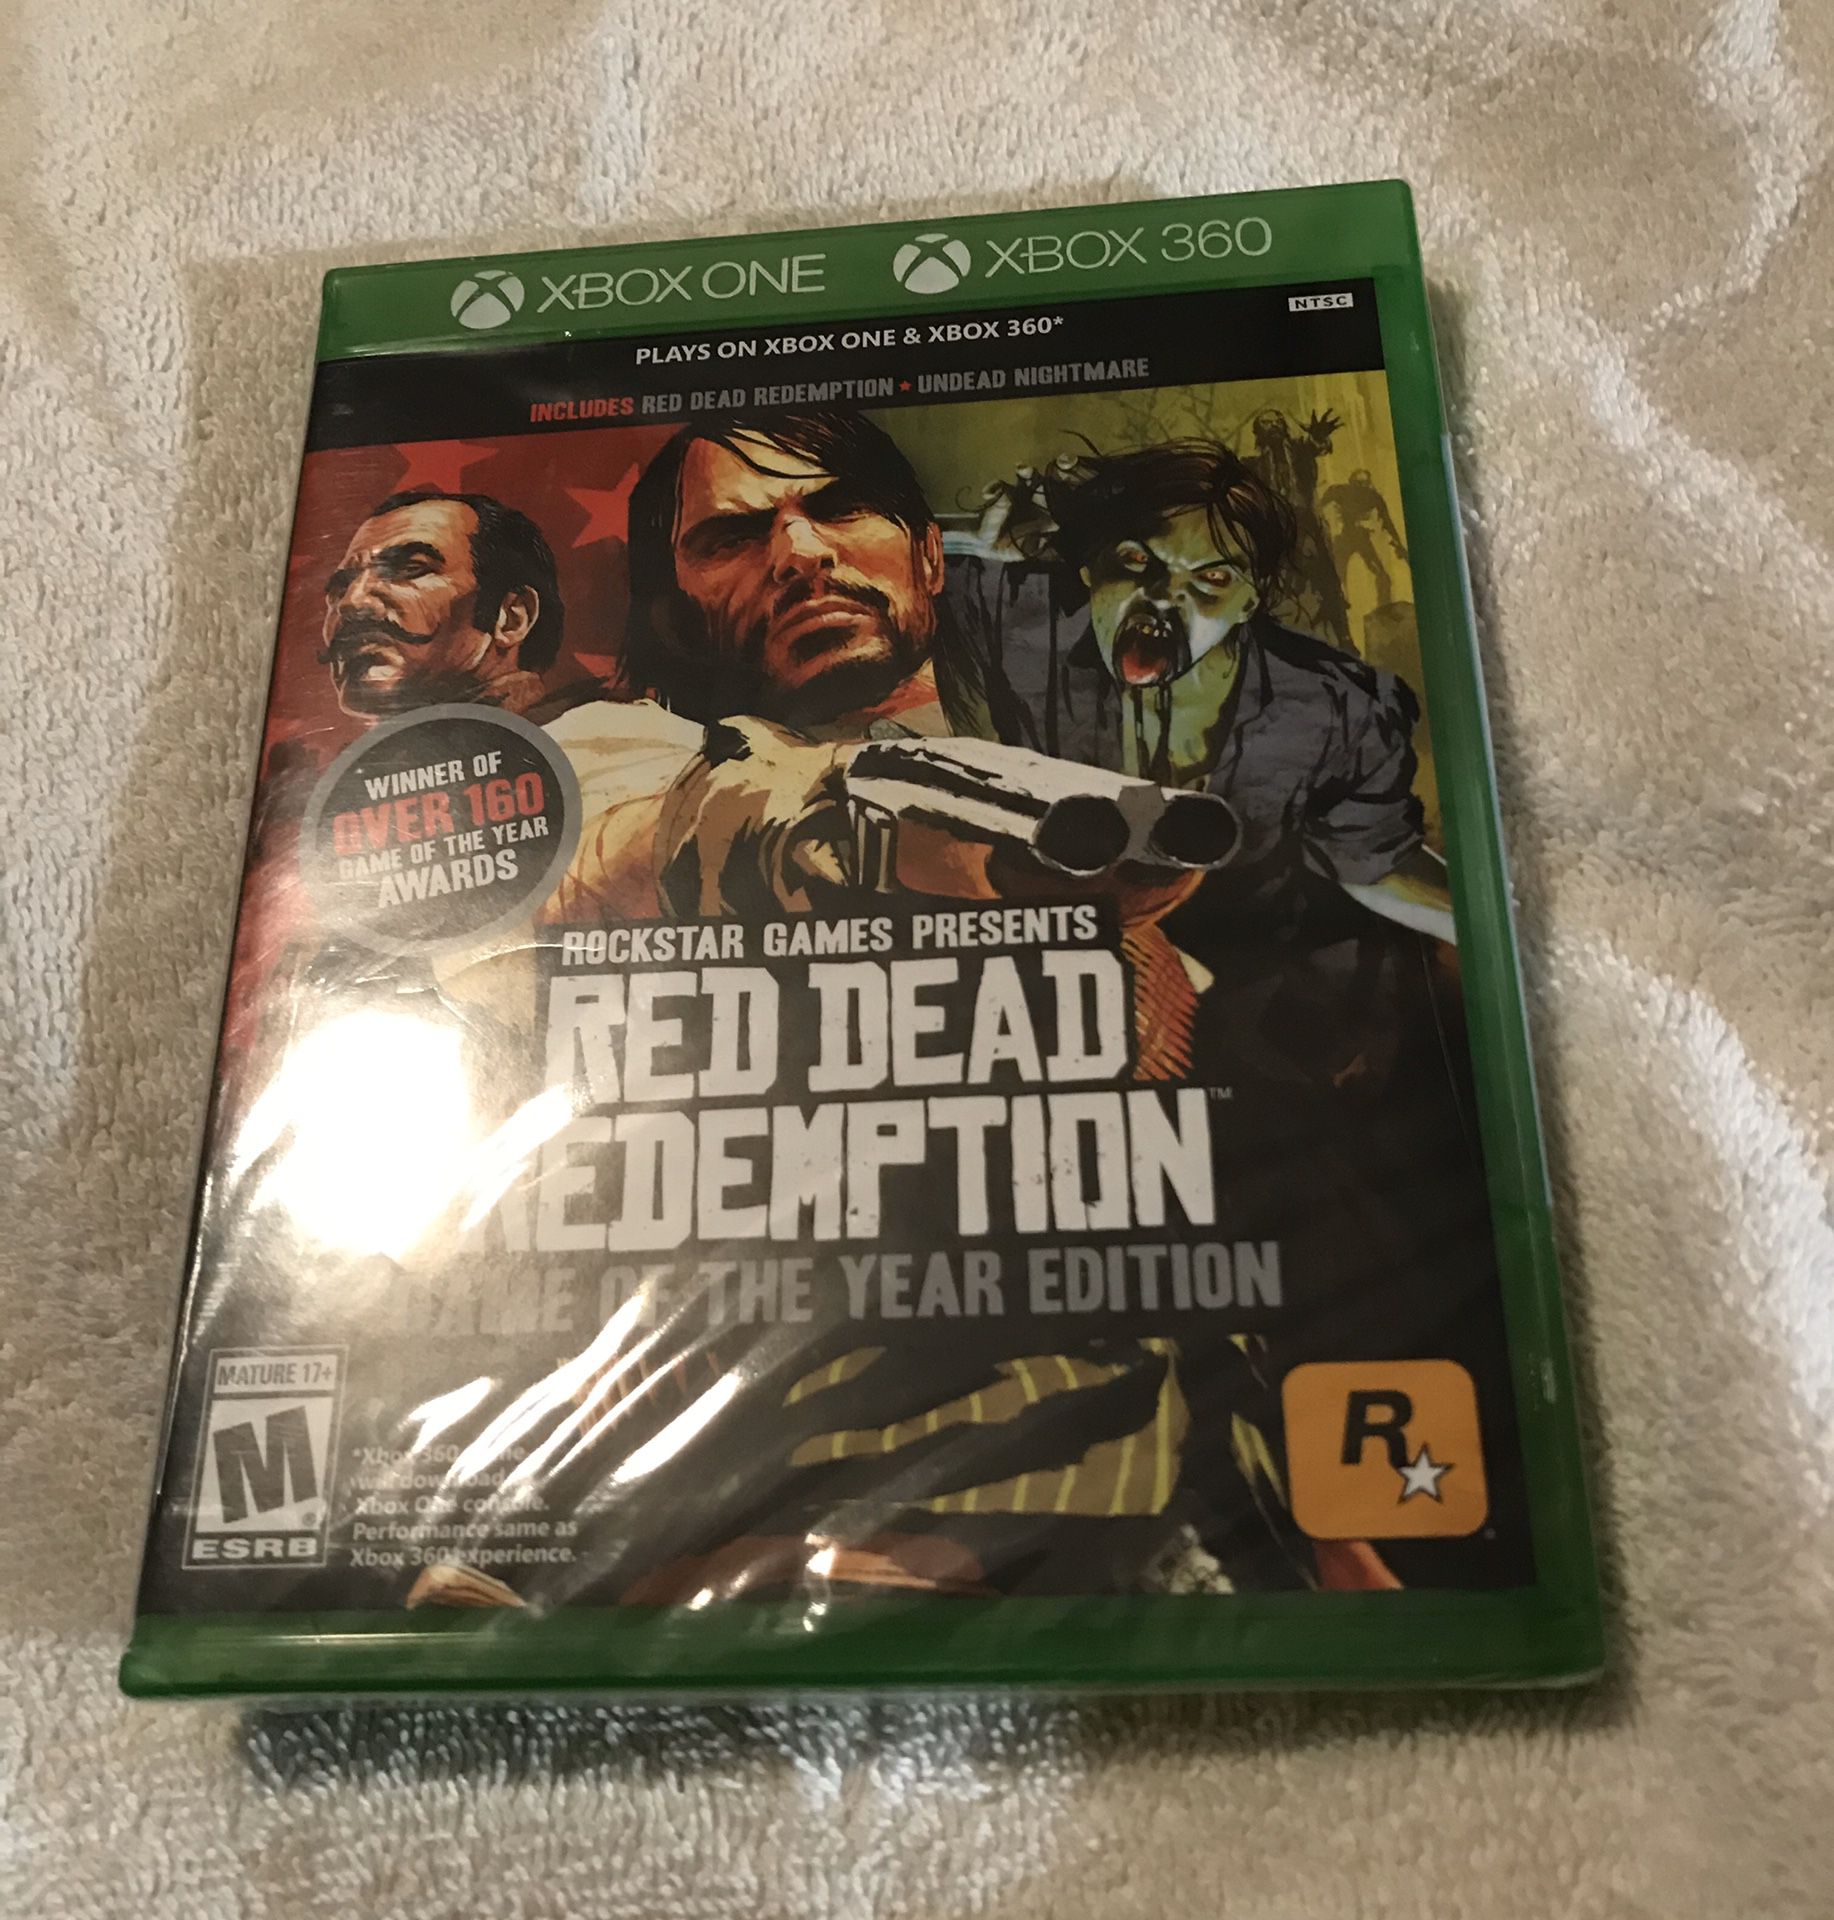 BRAND NEW AND FACTORY SEALED Red Dead Redemption Xbox One/360 Game of Year Edition, Rockstar Games